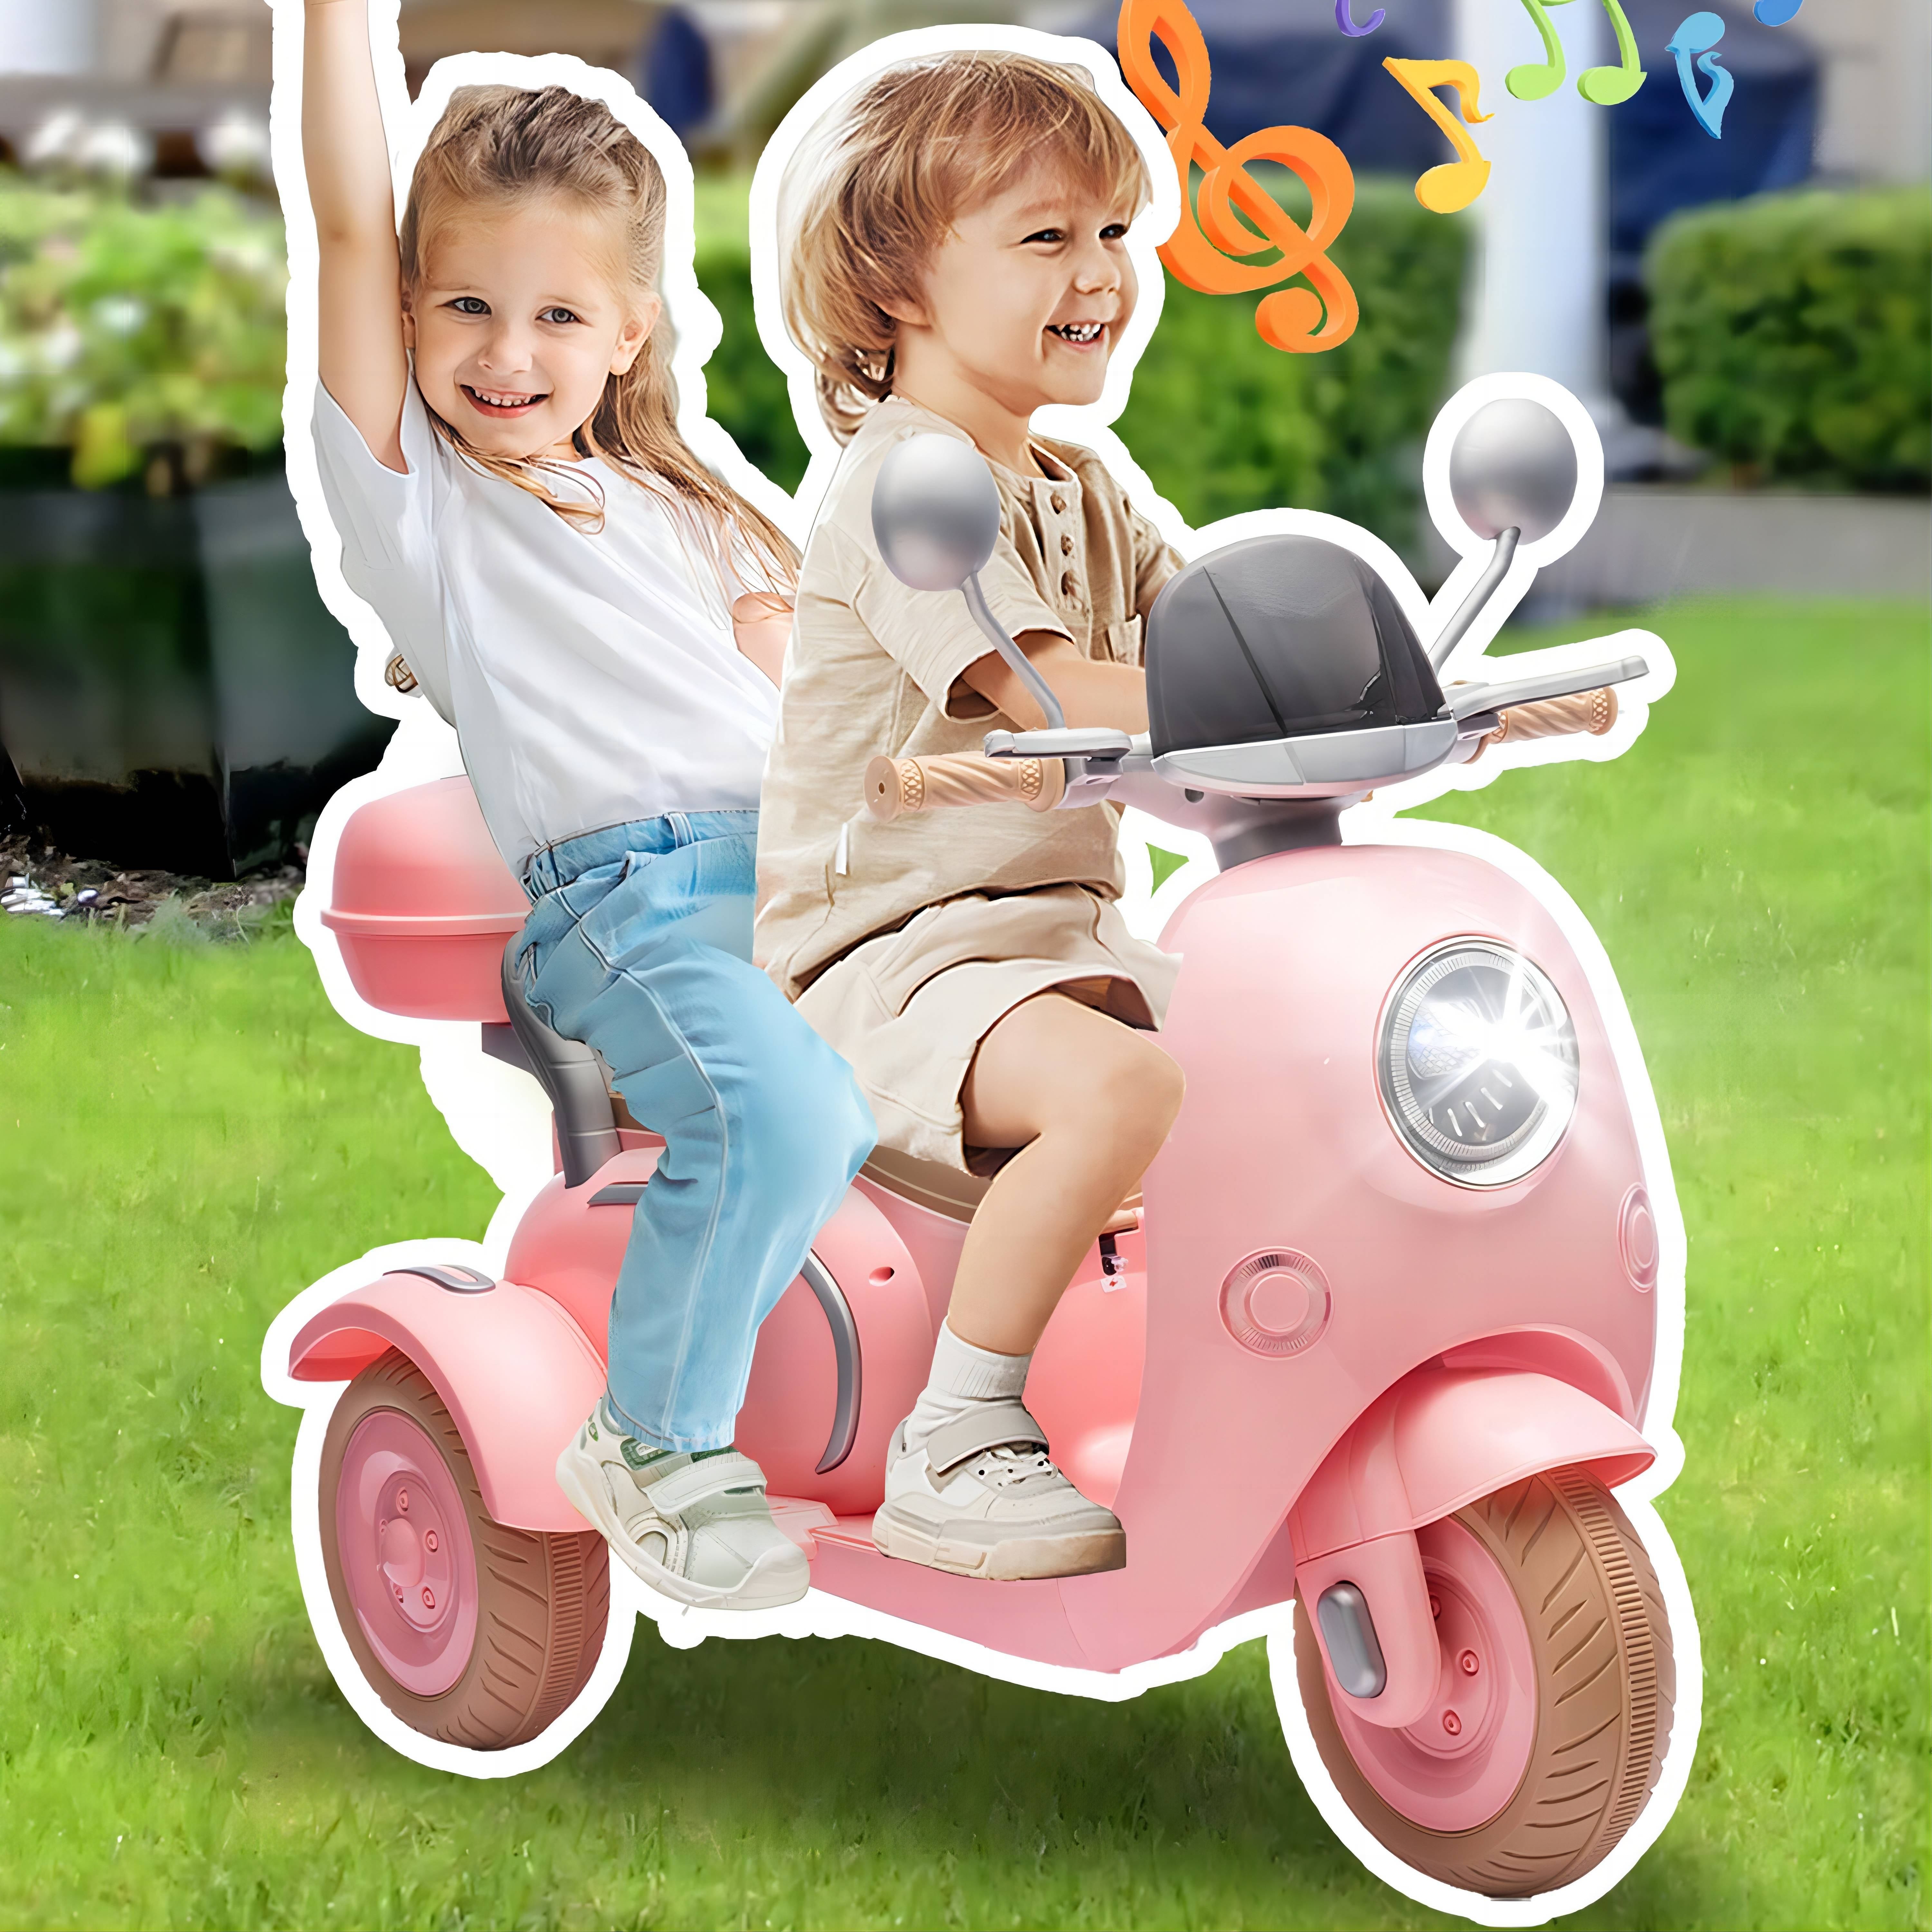 

12v Two-seat Kids Electric Toy Motorcycle, Three-wheeled Children's Toy, Slow Start Multi-functional Player Toy With Usb, Lights & Back Seat, Suitable For Children Aged 3-6